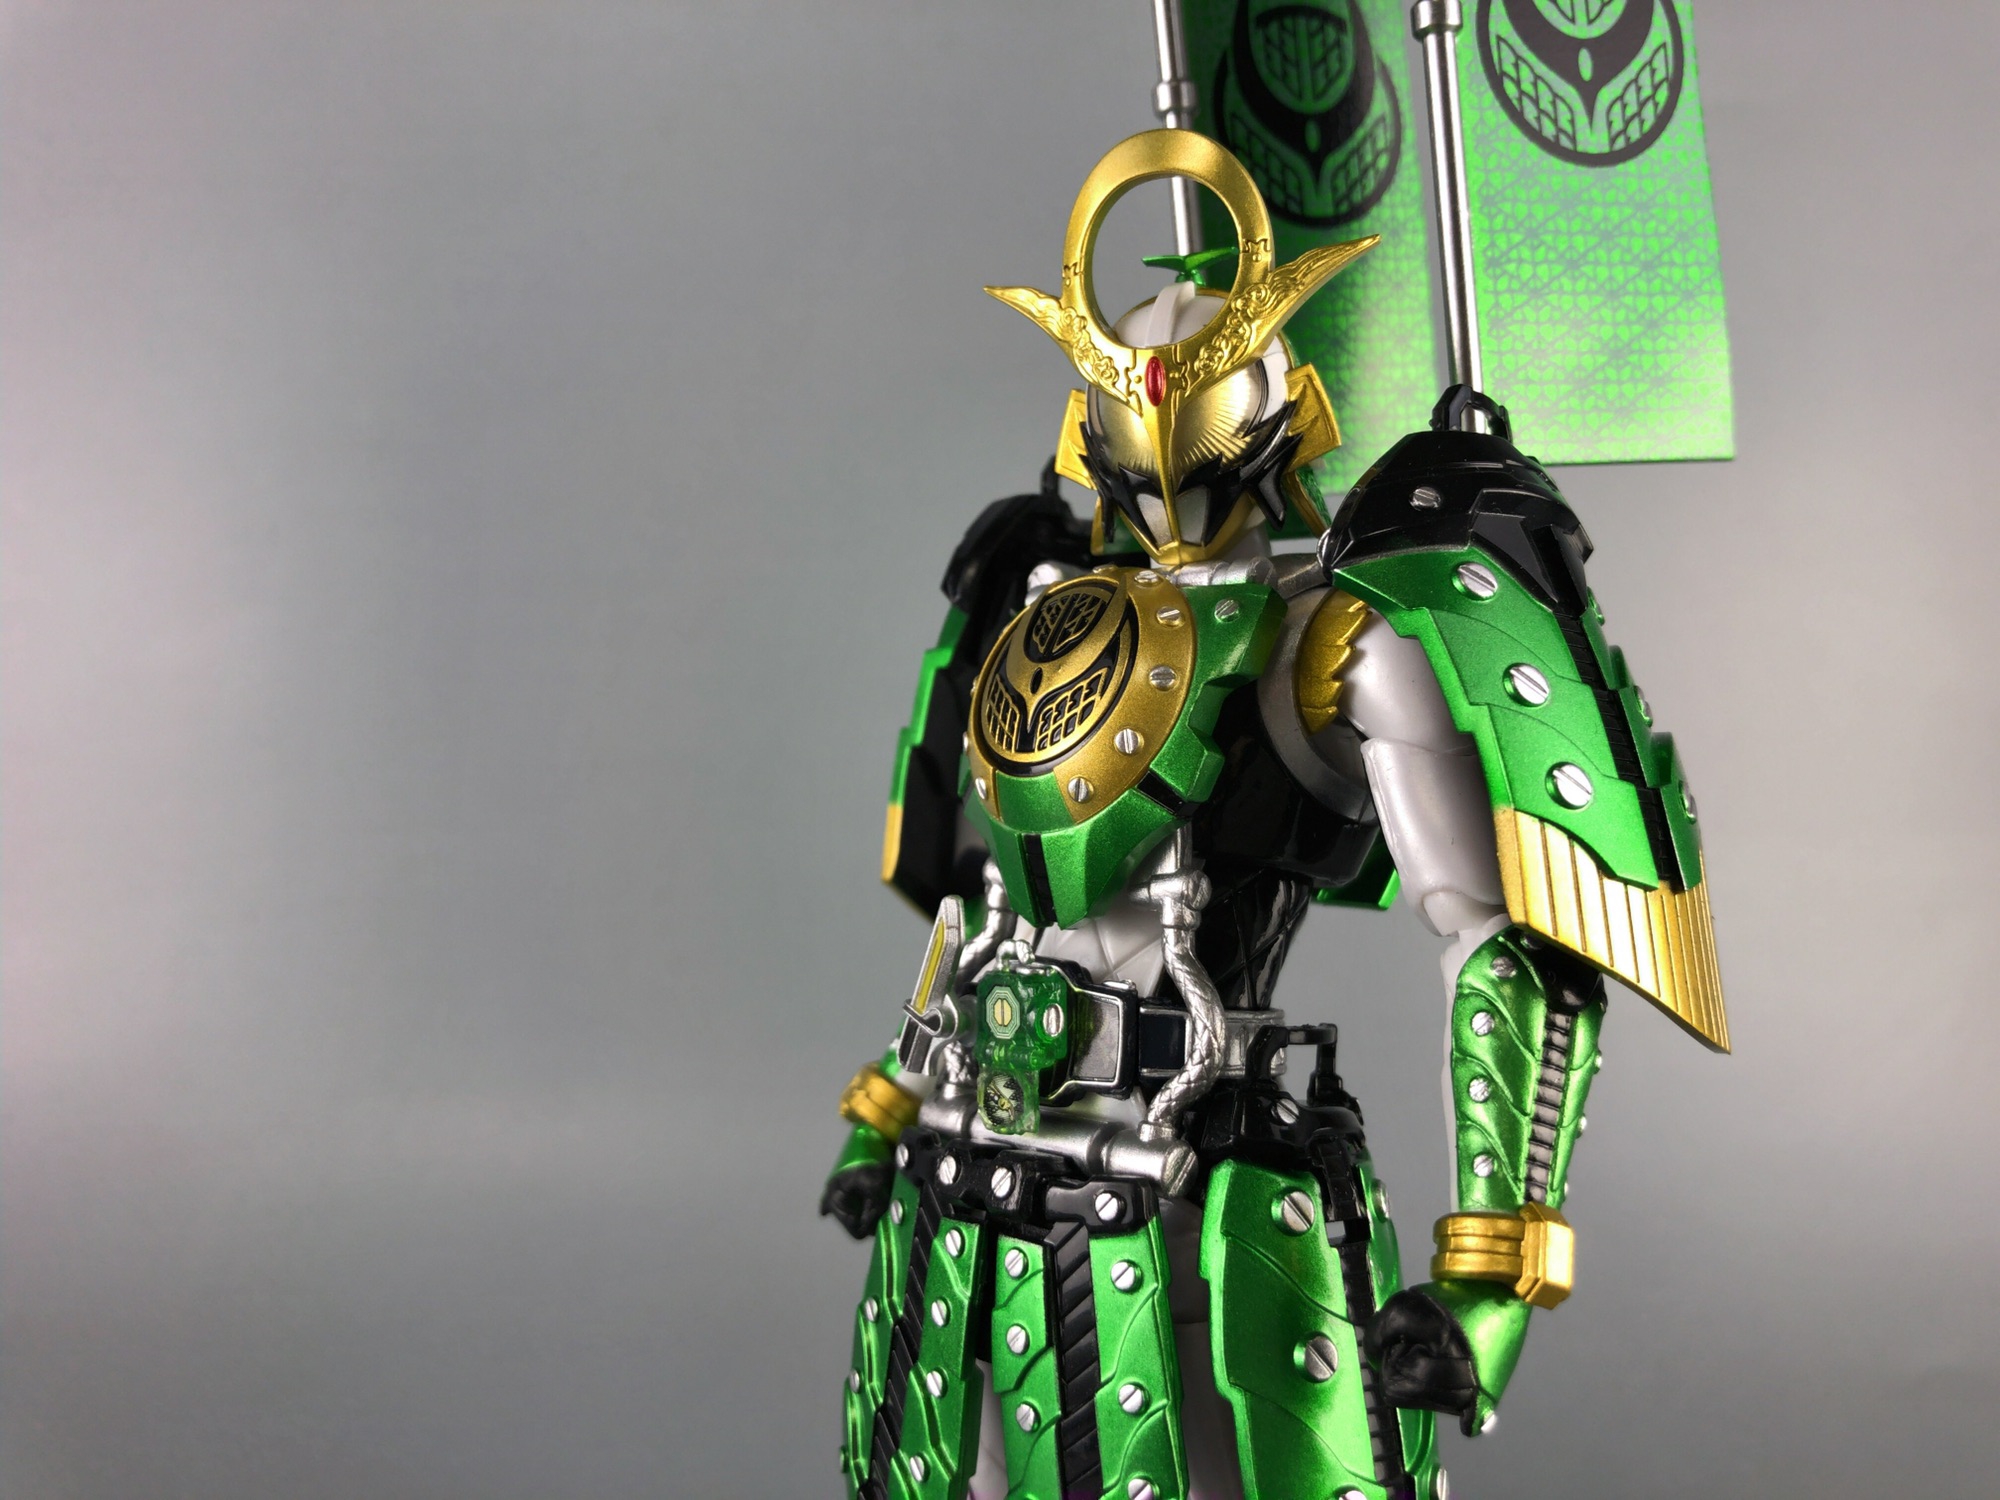 S.H.Figuarts仮面ライダー斬月カチドキアームズ | 現在更新を停止中